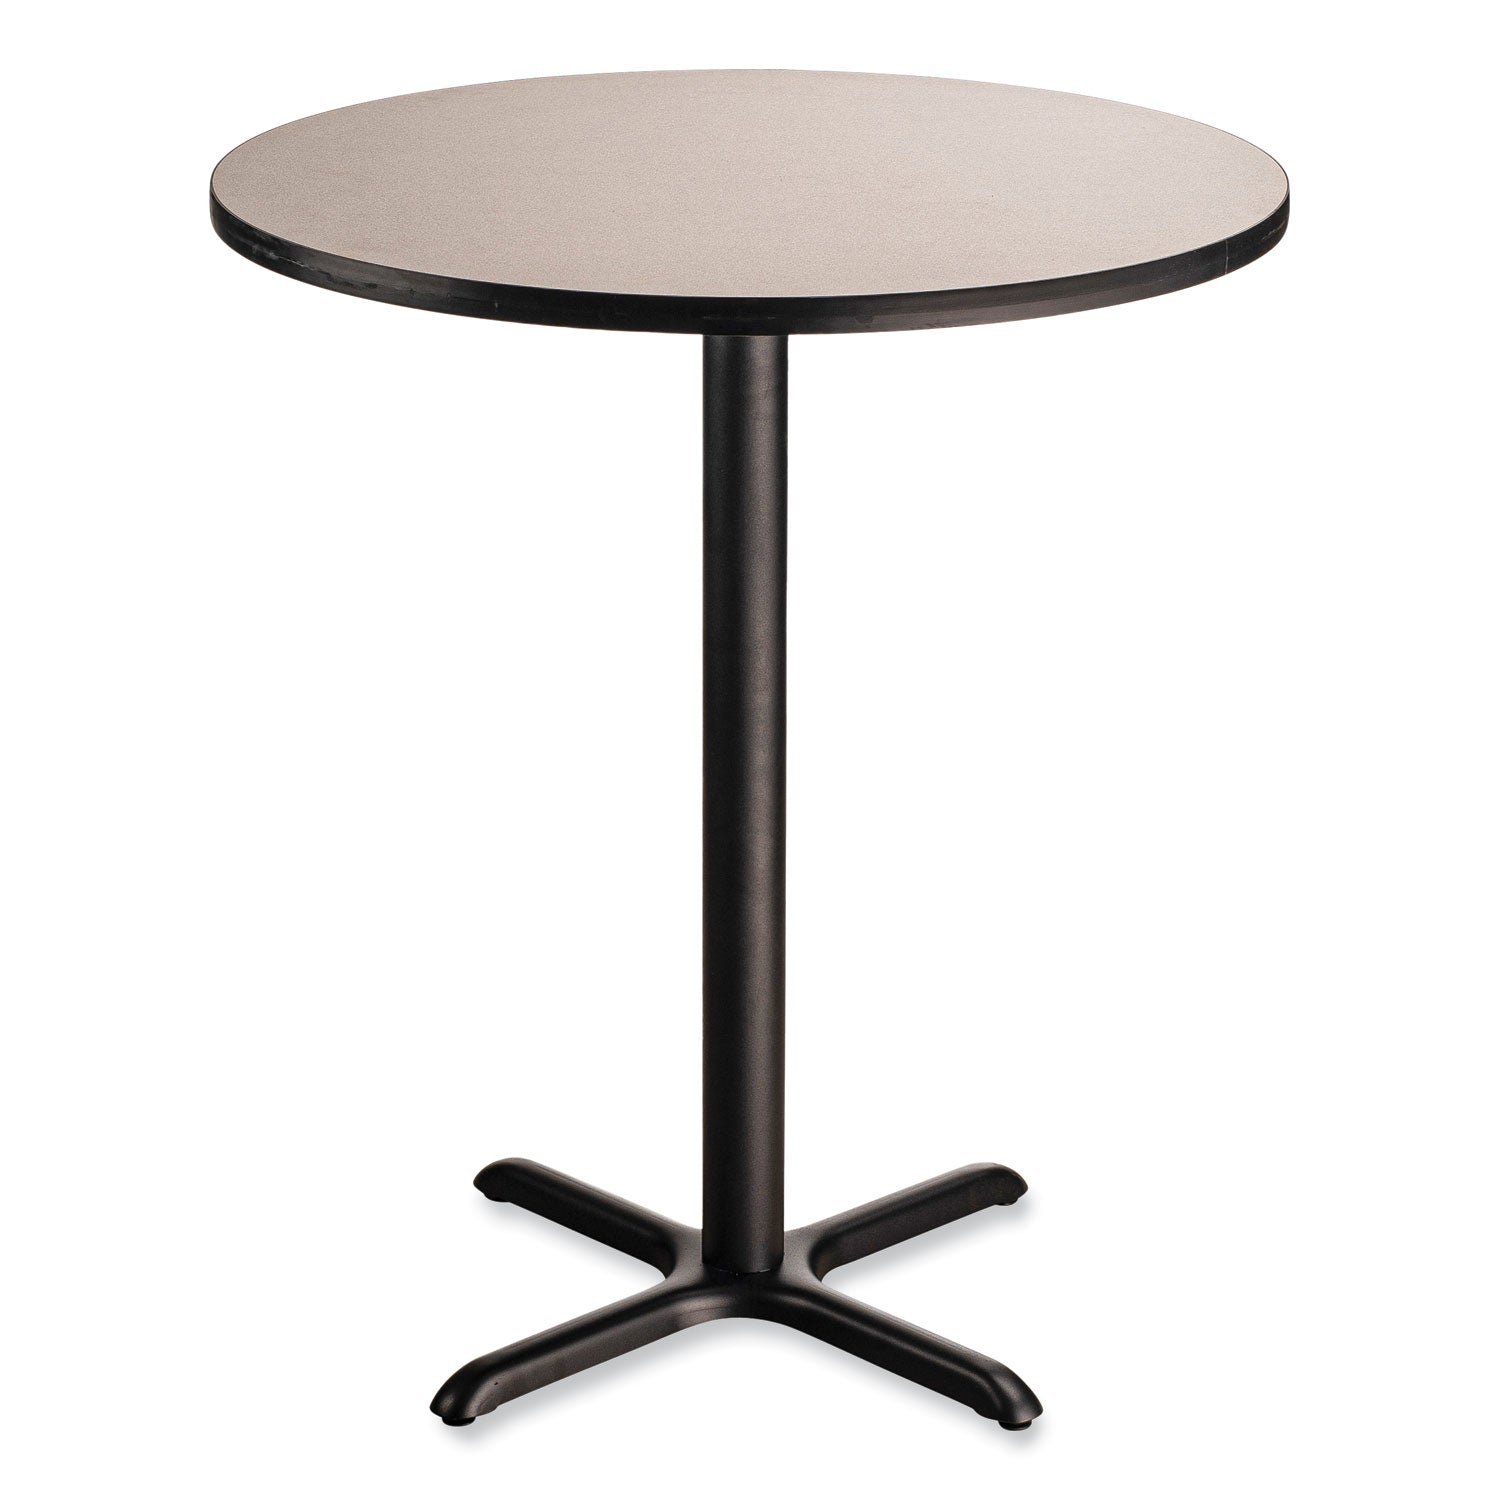 cafe-table-36-diameter-x-42h-round-top-x-base-gray-nebula-top-black-base-ships-in-7-10-business-days_npsct13636xb1gy - 1